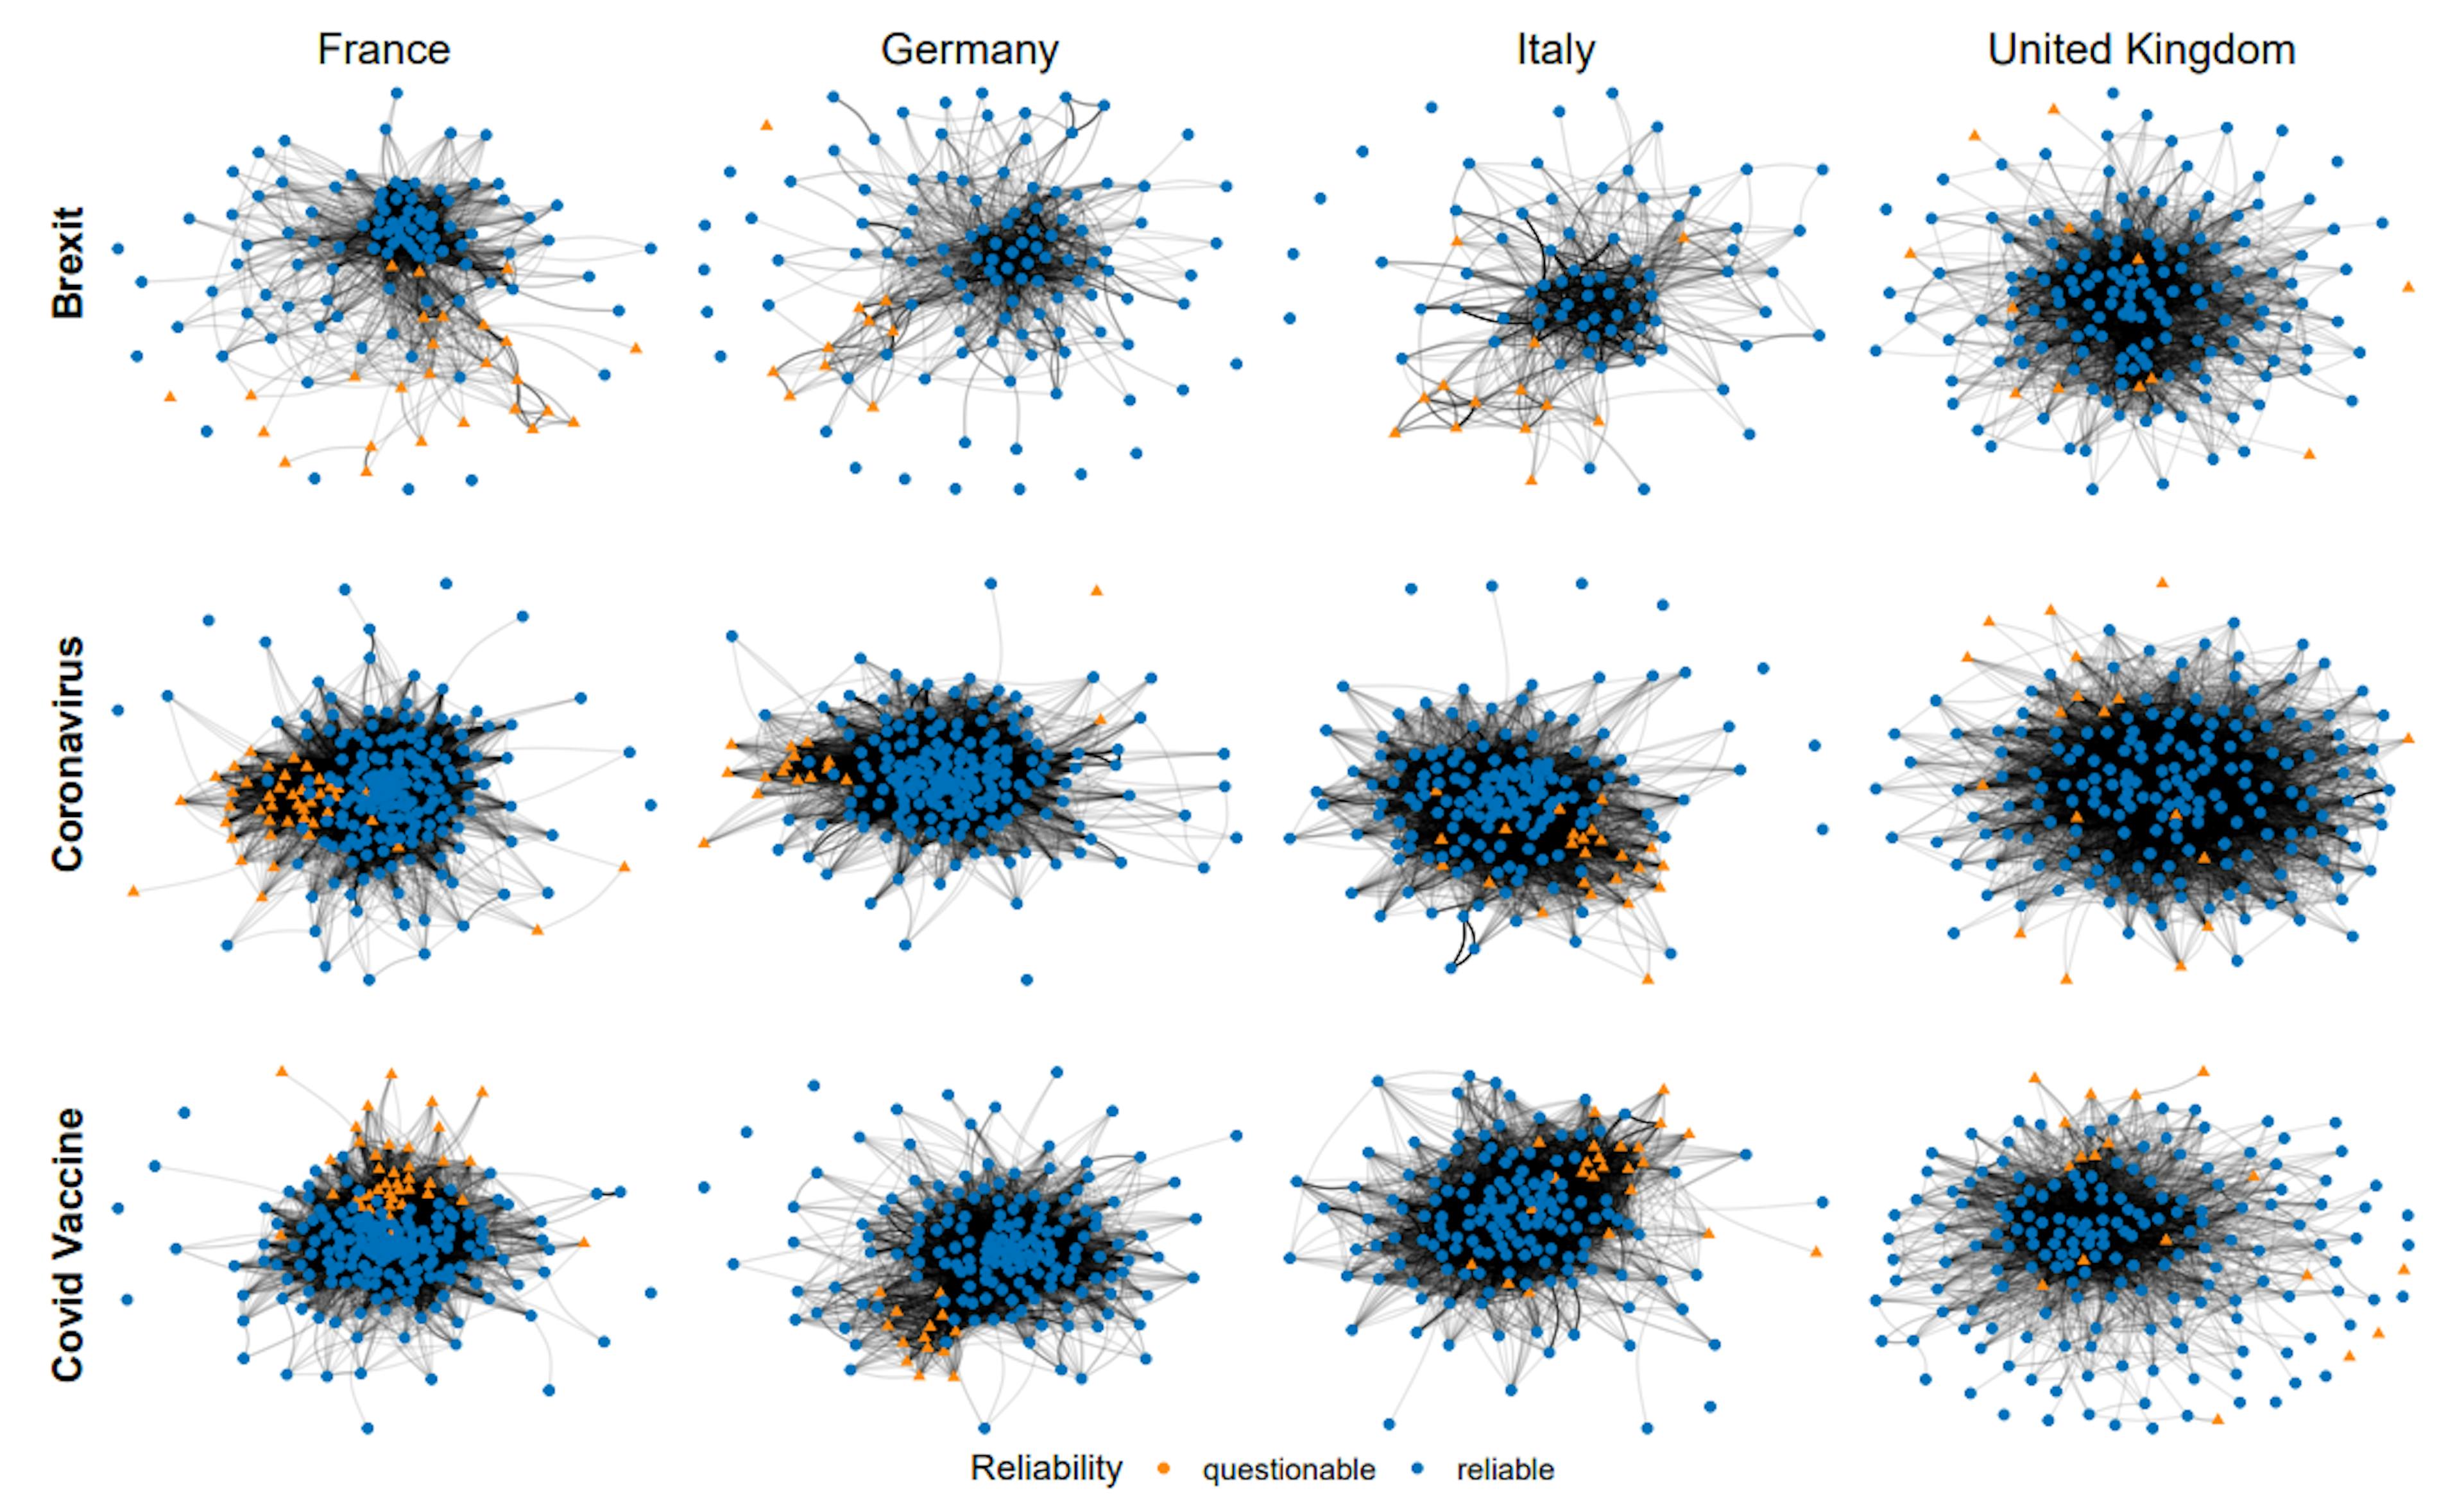 Figure 4: Similarity network among news outlets, where each news source is represented as a node, and edges represent audiences’ similarity among news outlets. The color and shape of the nodes indicate the classification of the news source, and the thickness of the edges represents the level of similarity of retweeters between two news sources. We discarded edges with weights lower than the overall median of the edges. Each network represents the news outlets’ similarity on one topic for one country.